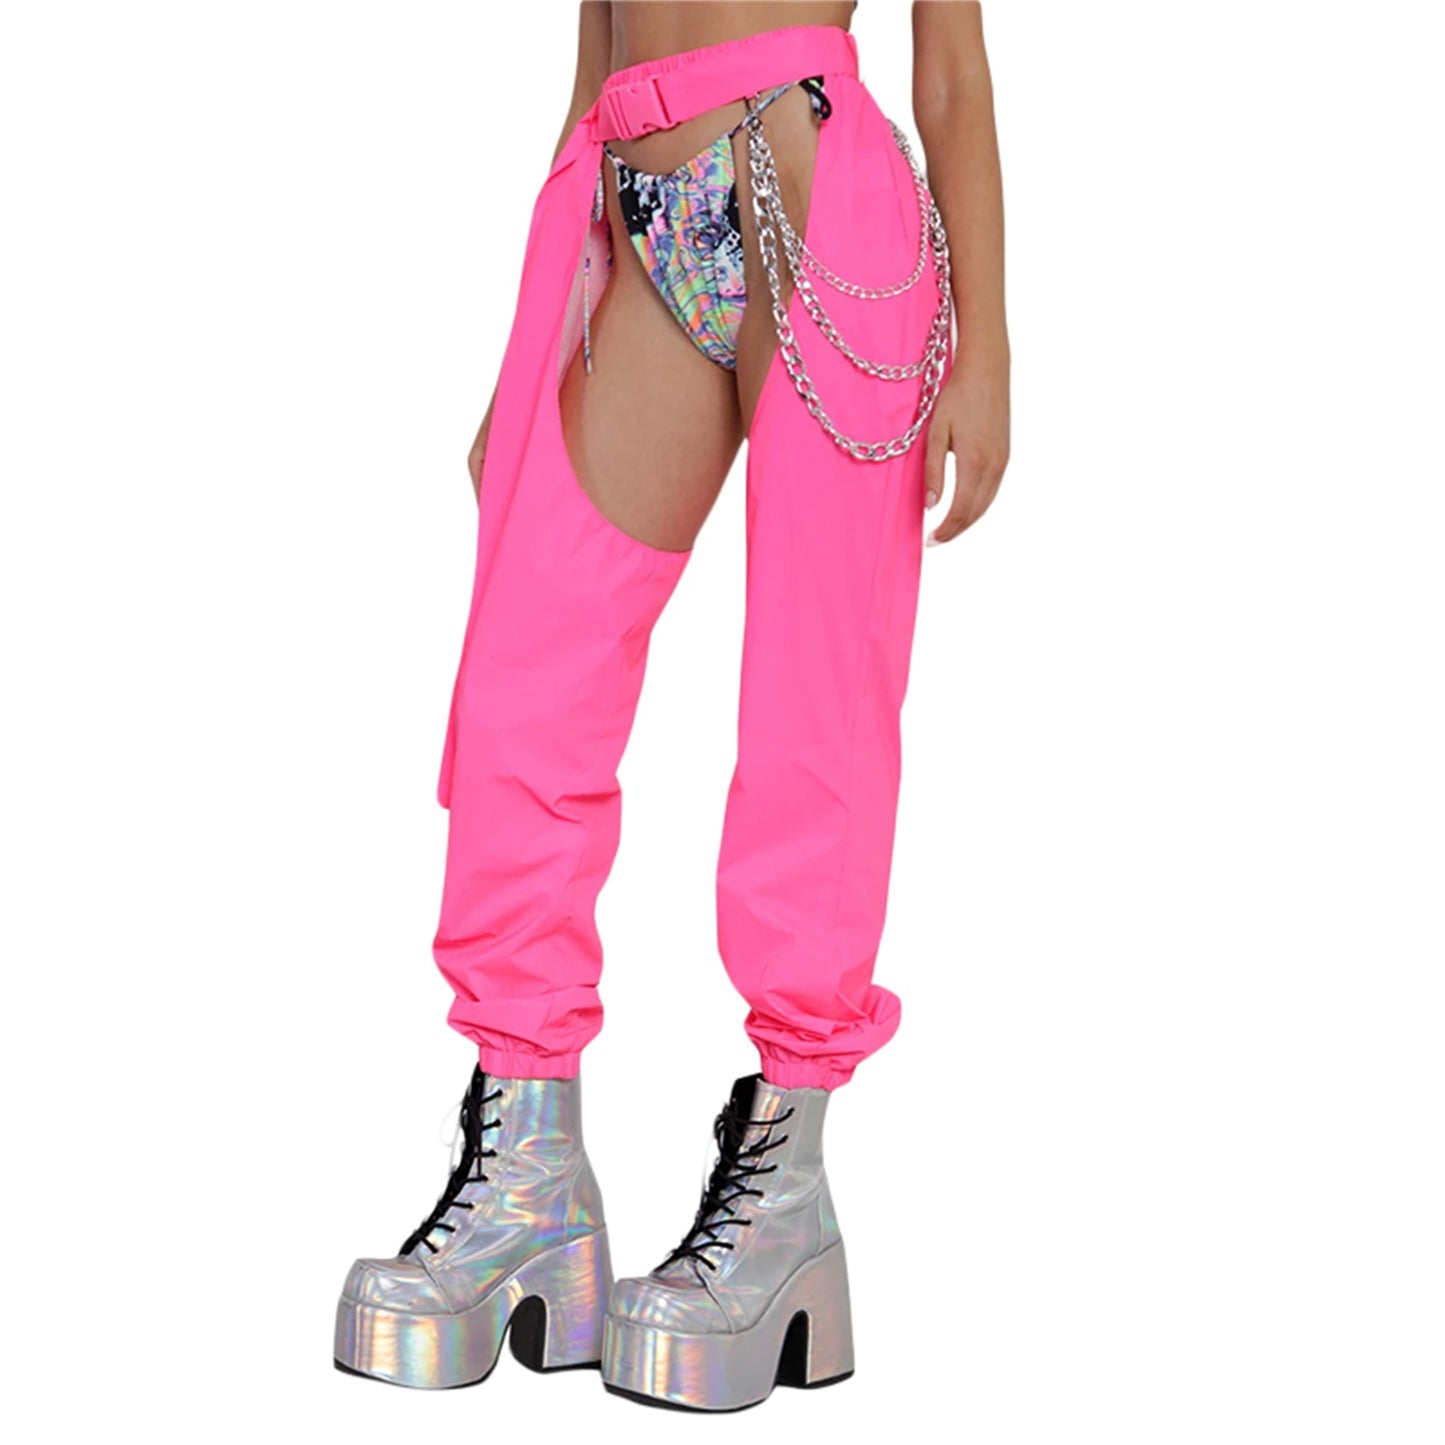 pink chaps for festivals and raves